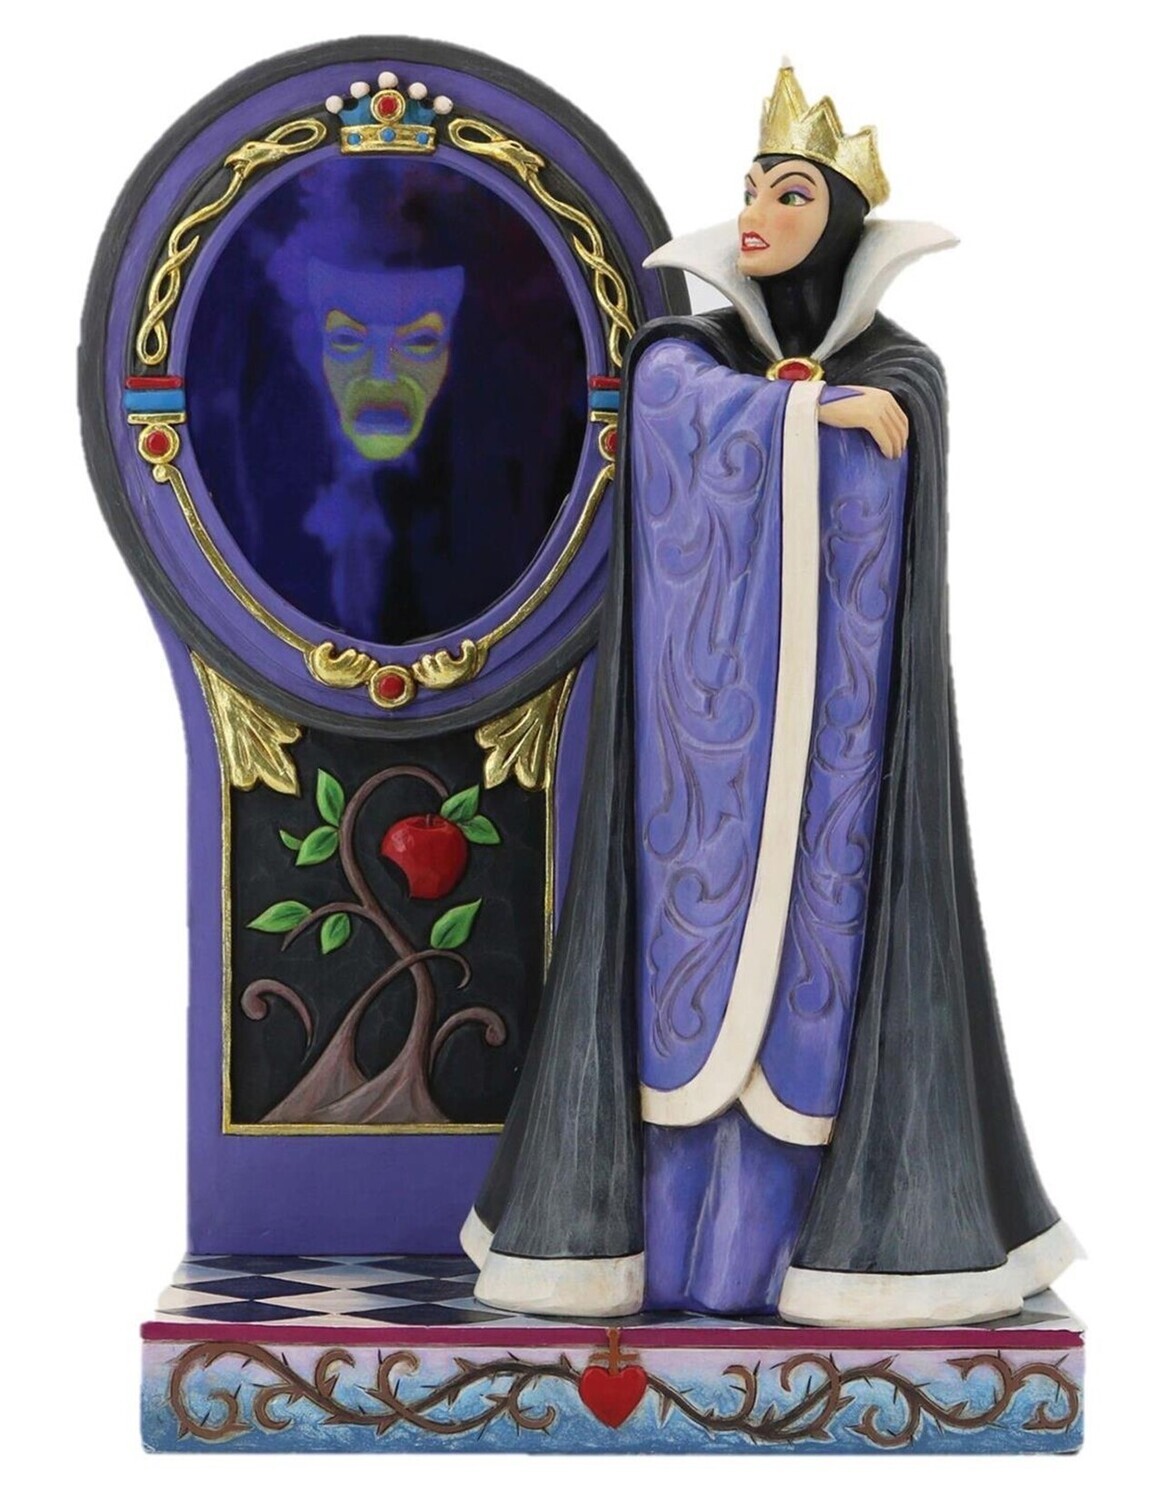 Jim Shore Disney Traditions "Who's the Fairest One of All?" Evil Queen Figurine (6013067)